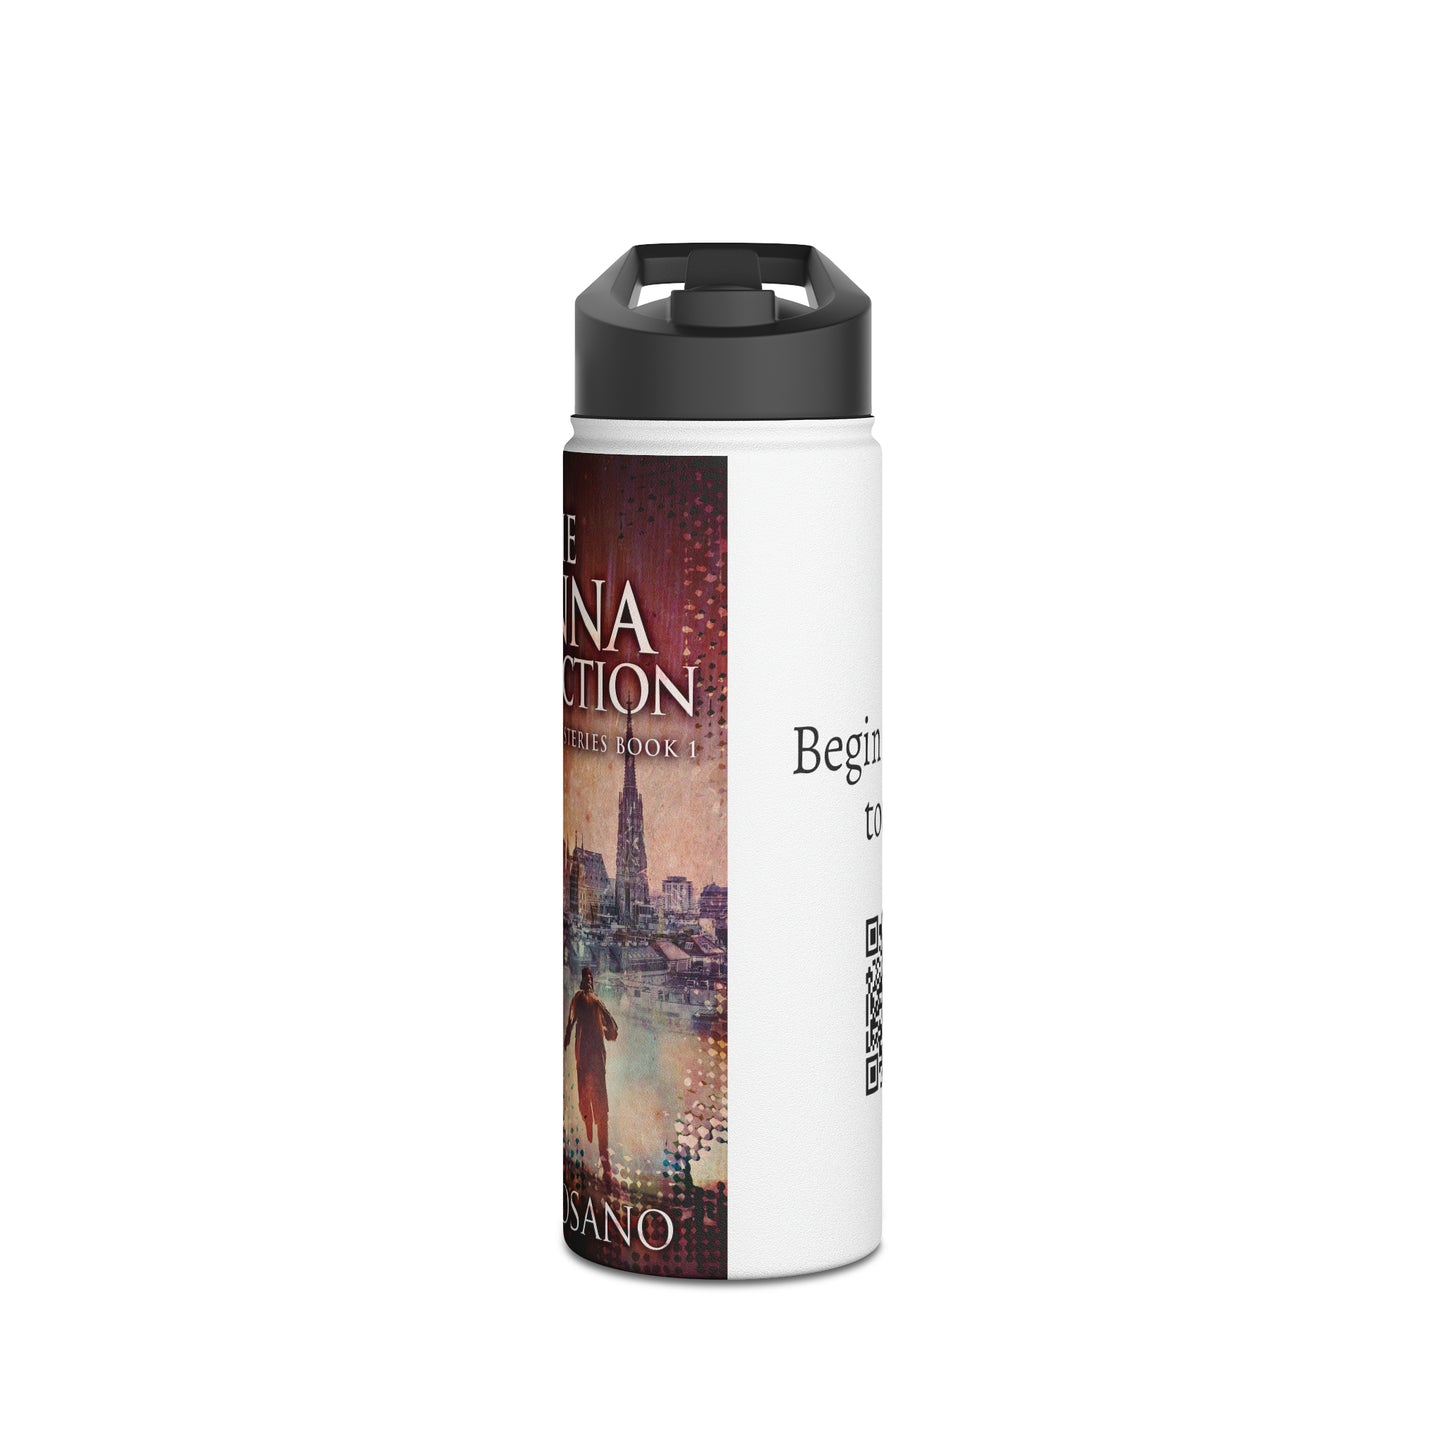 The Vienna Connection - Stainless Steel Water Bottle